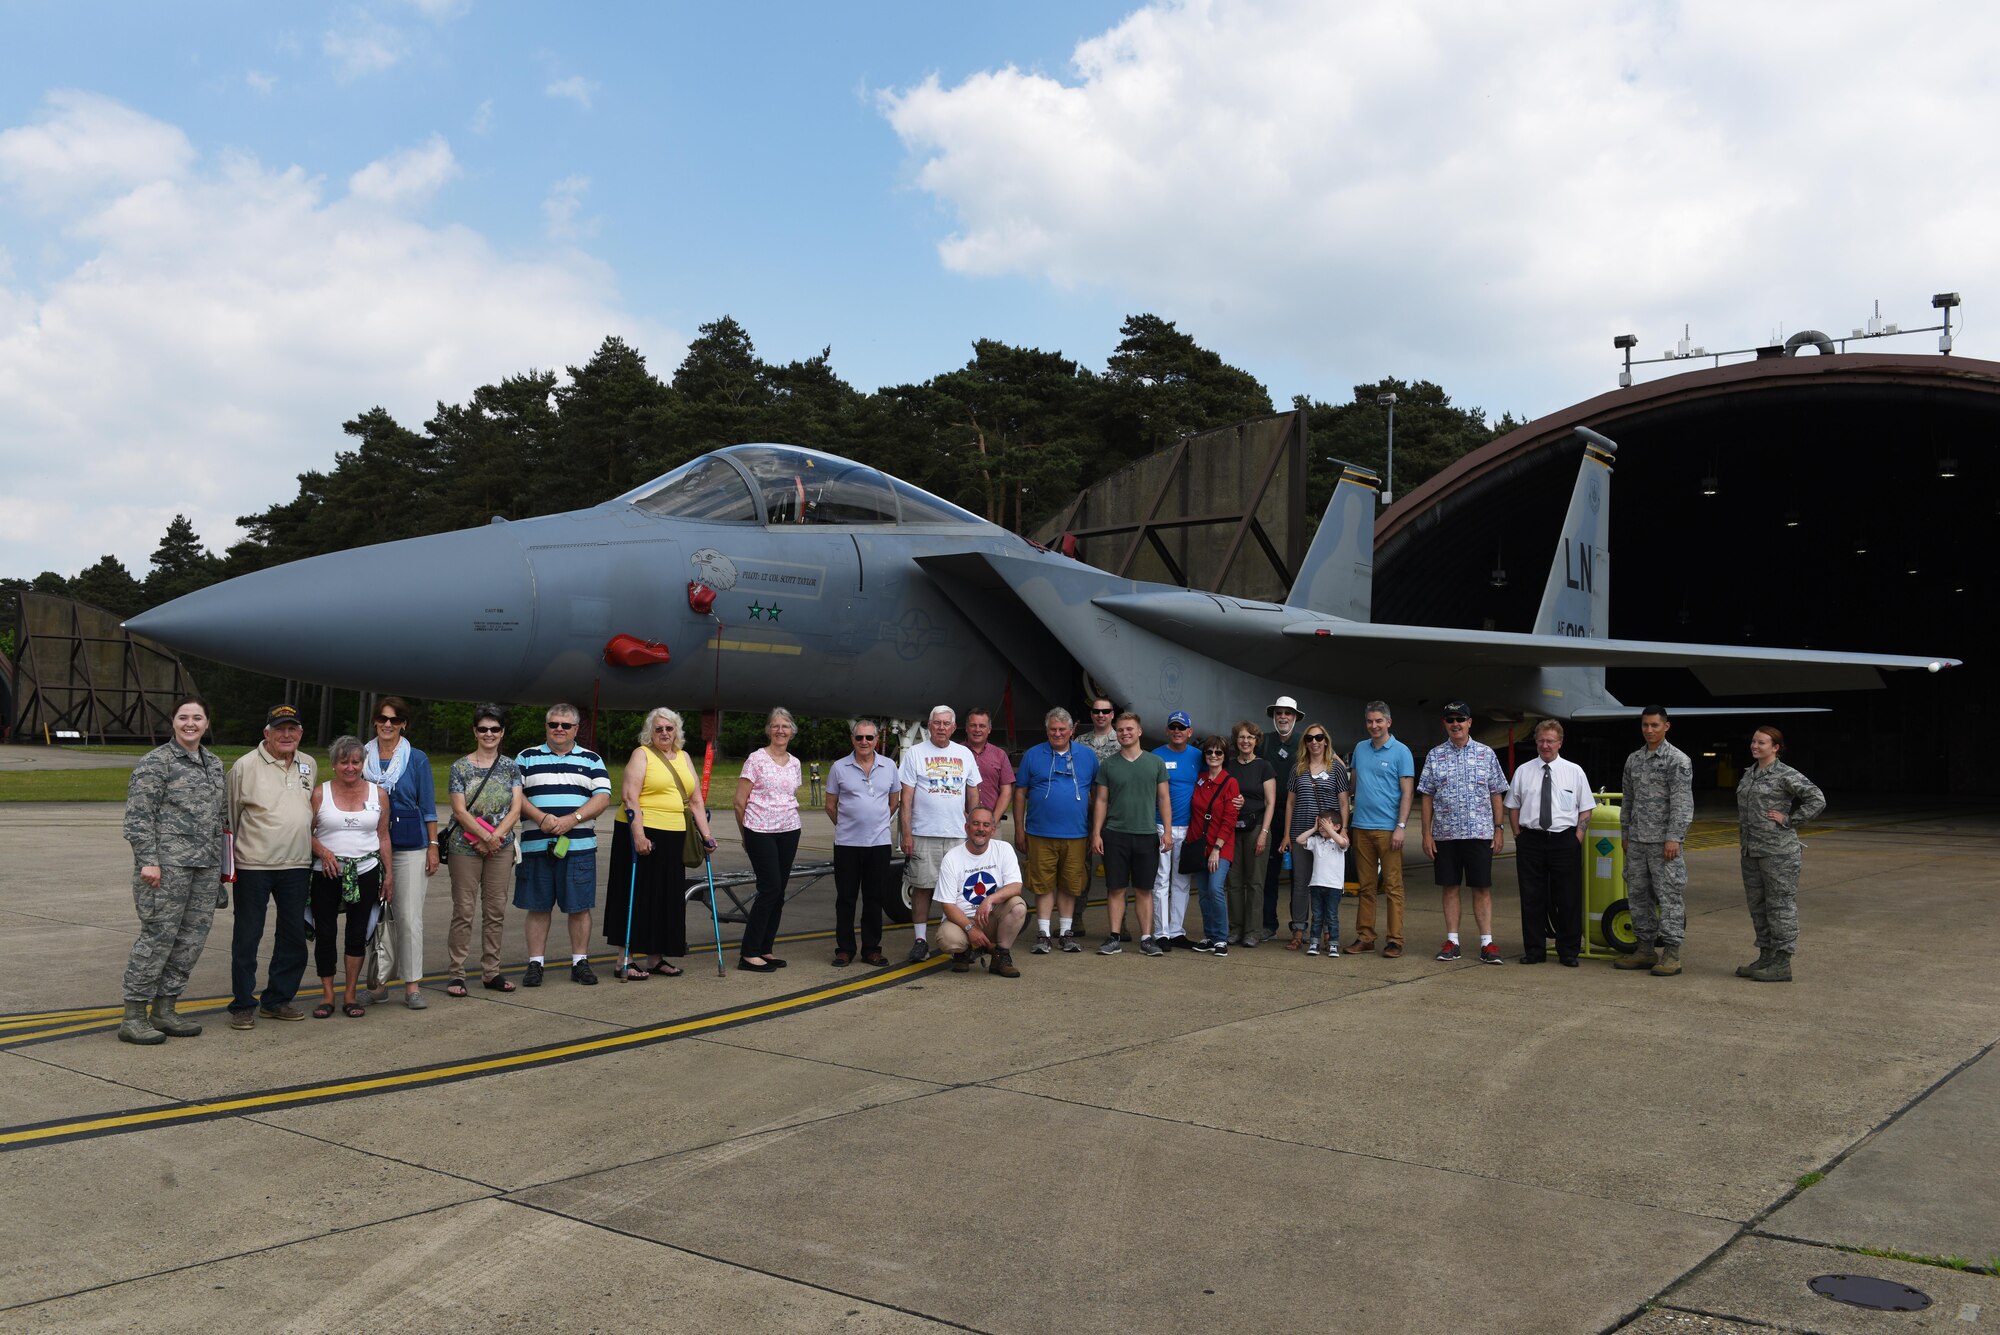 Members of the 305th Bomb Wing Heritage Group pose for a photo with an F-15C Eagle at Royal Air Force Lakenheath, May 25. The 305th Bomb Wing Heritage Group is composed of former Airmen from the 305th or descendants of members from the unit. (U.S. Air Force photo/Airman 1st Class John A. Crawford)